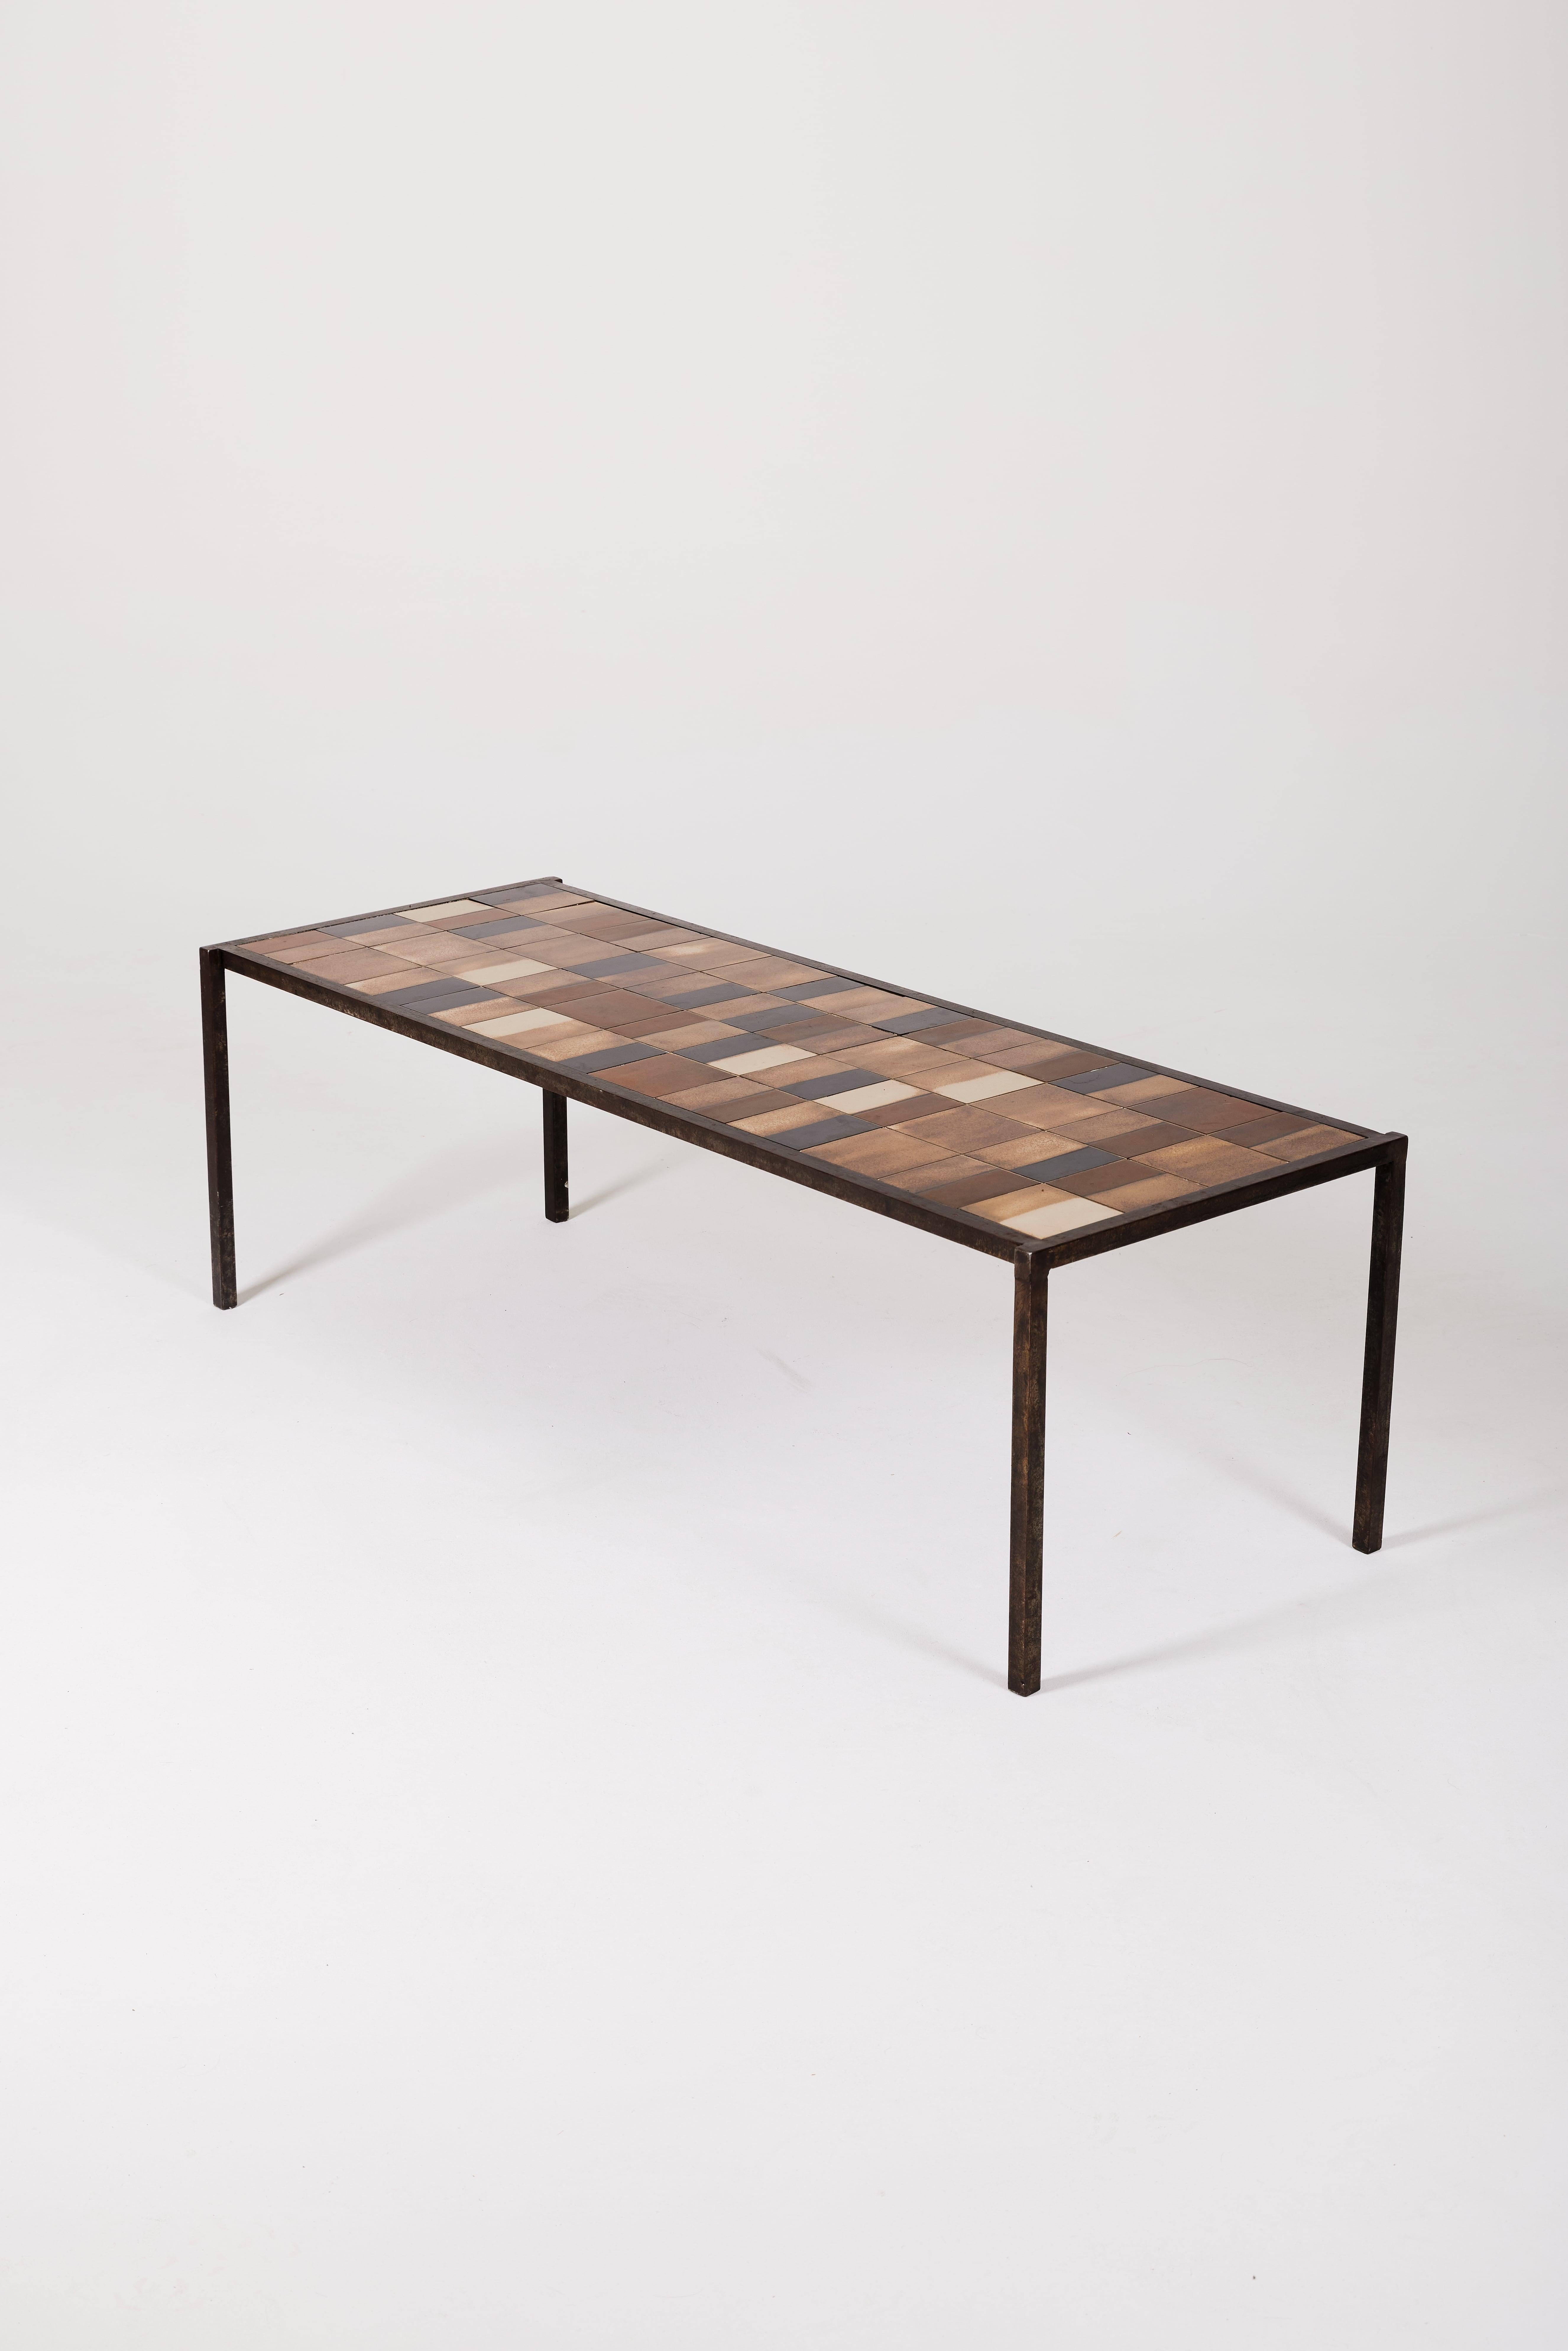 20th Century Ceramic coffee table by Mado Jolain & Ren Legrand For Sale